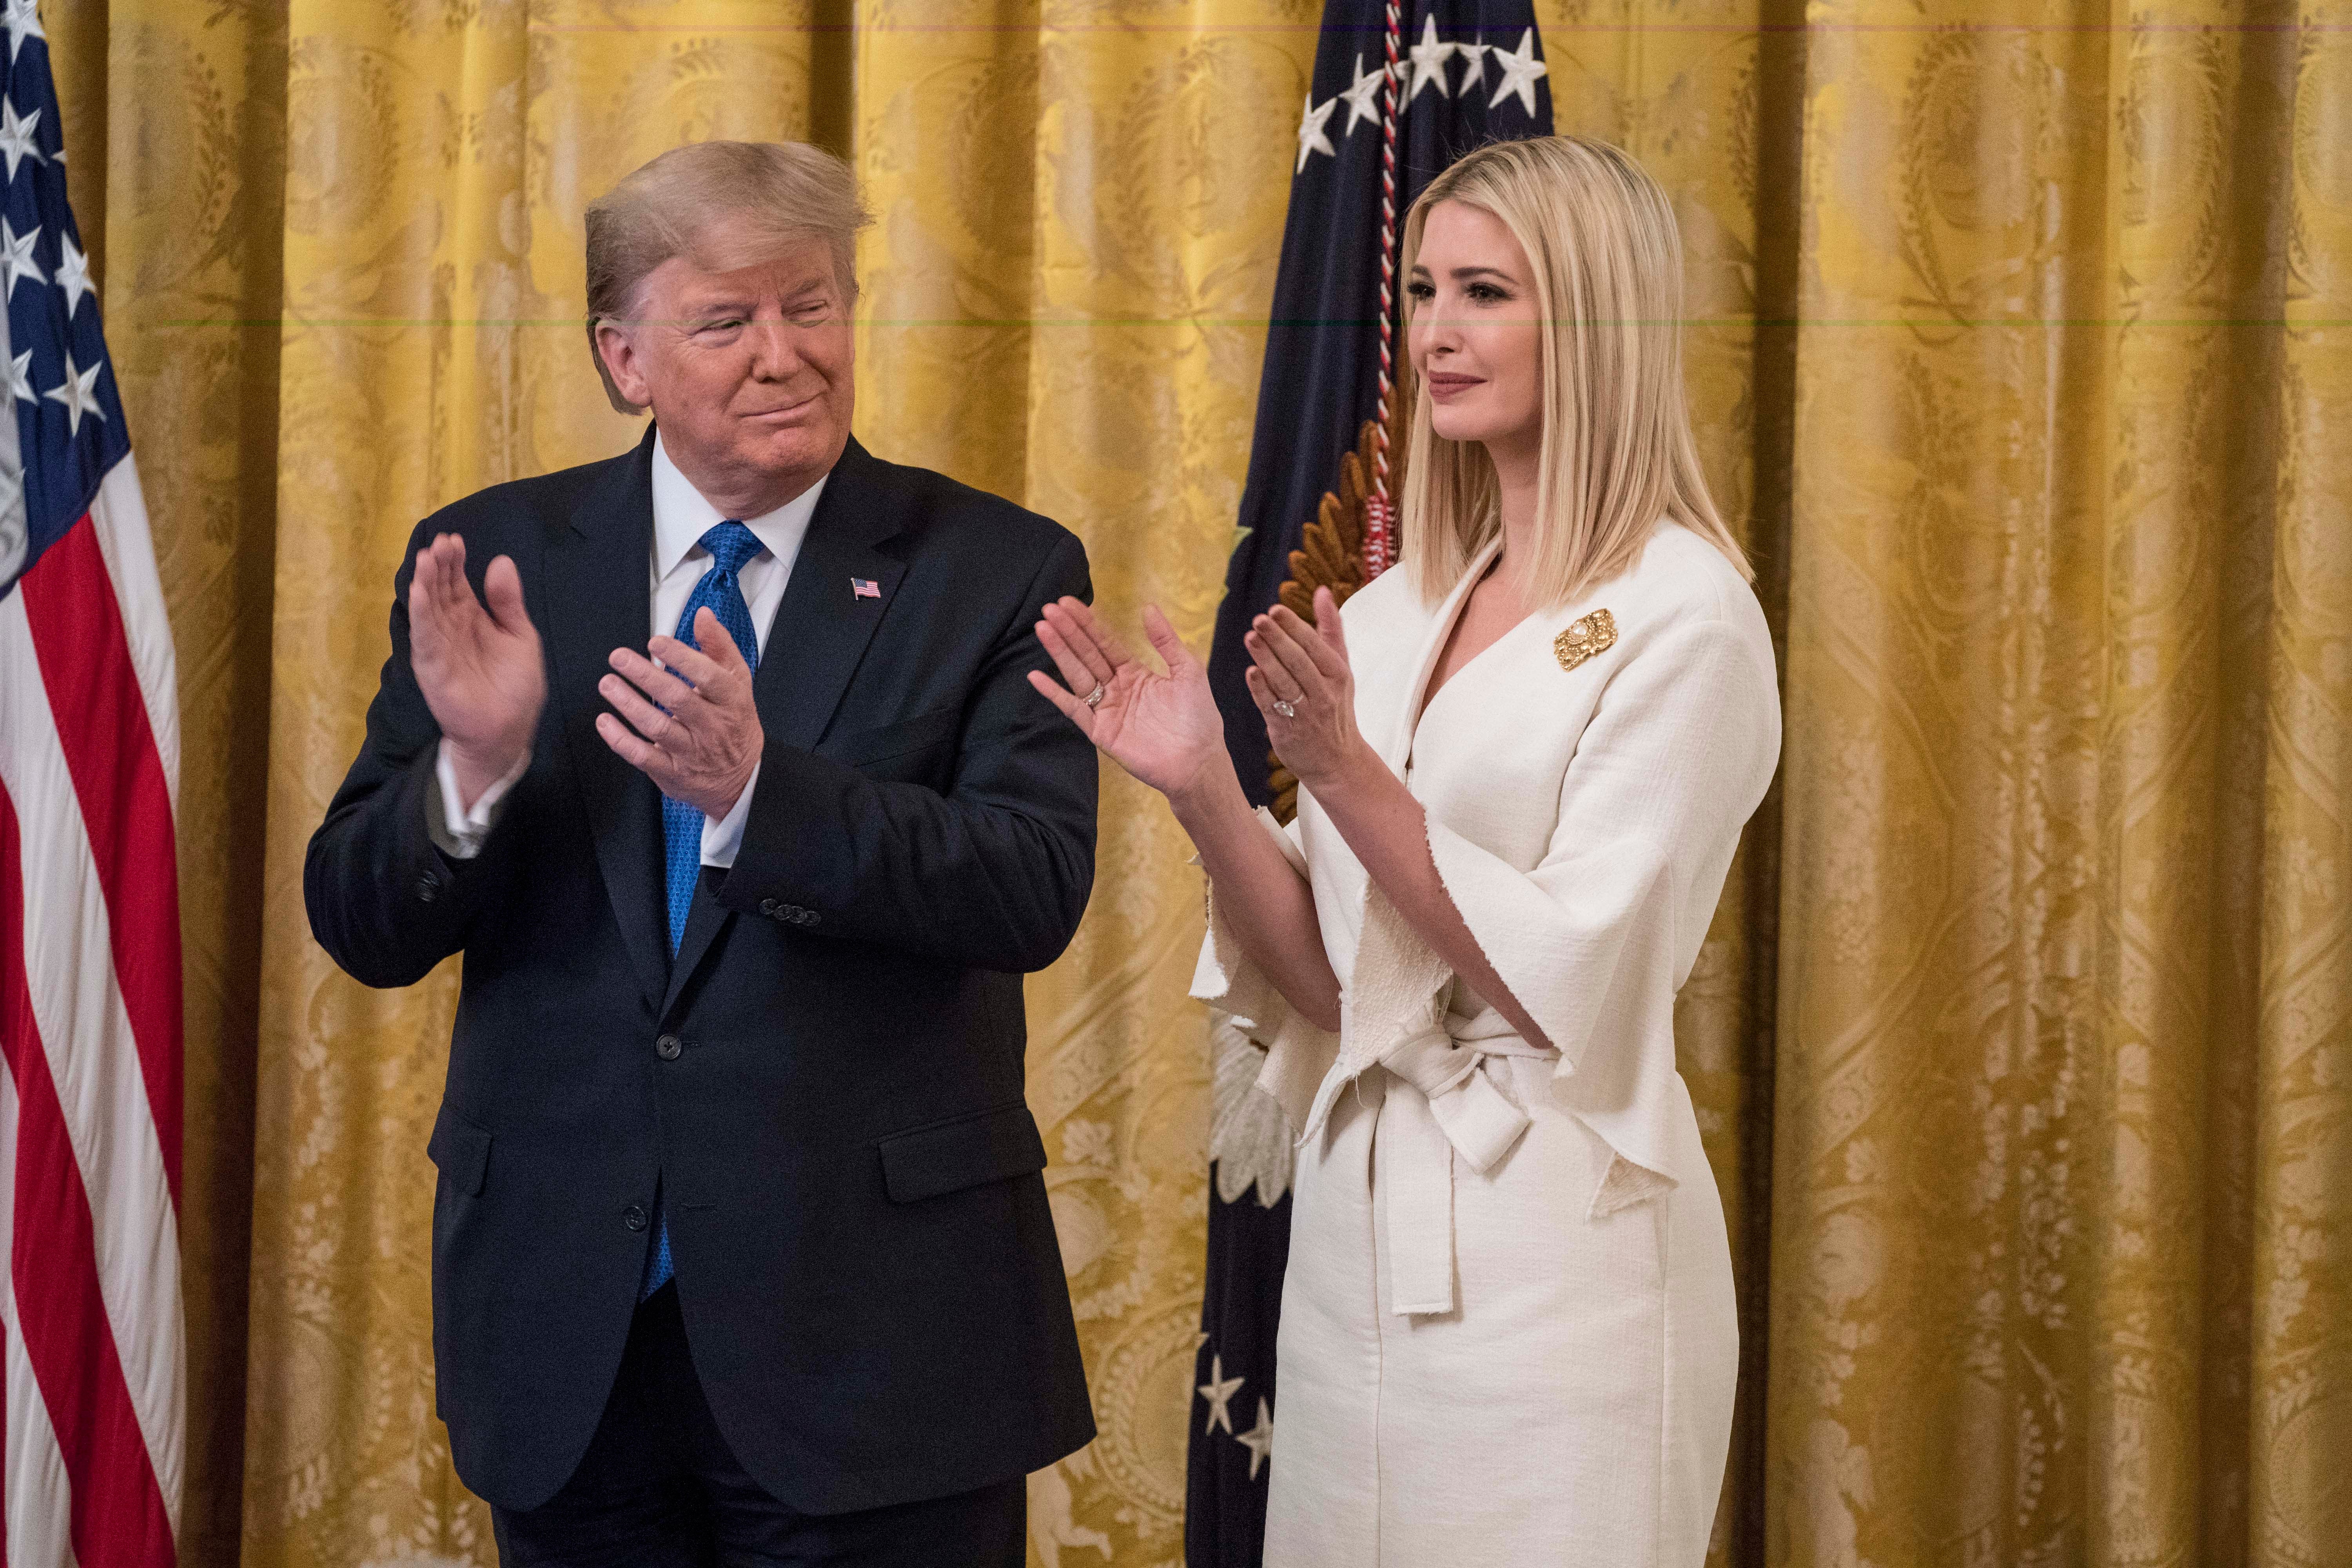 Ivanka Trump will attend the 2024 Republican National Convention, where Donald Trump will formally accept the GOP’s nomination to run in the presidential election